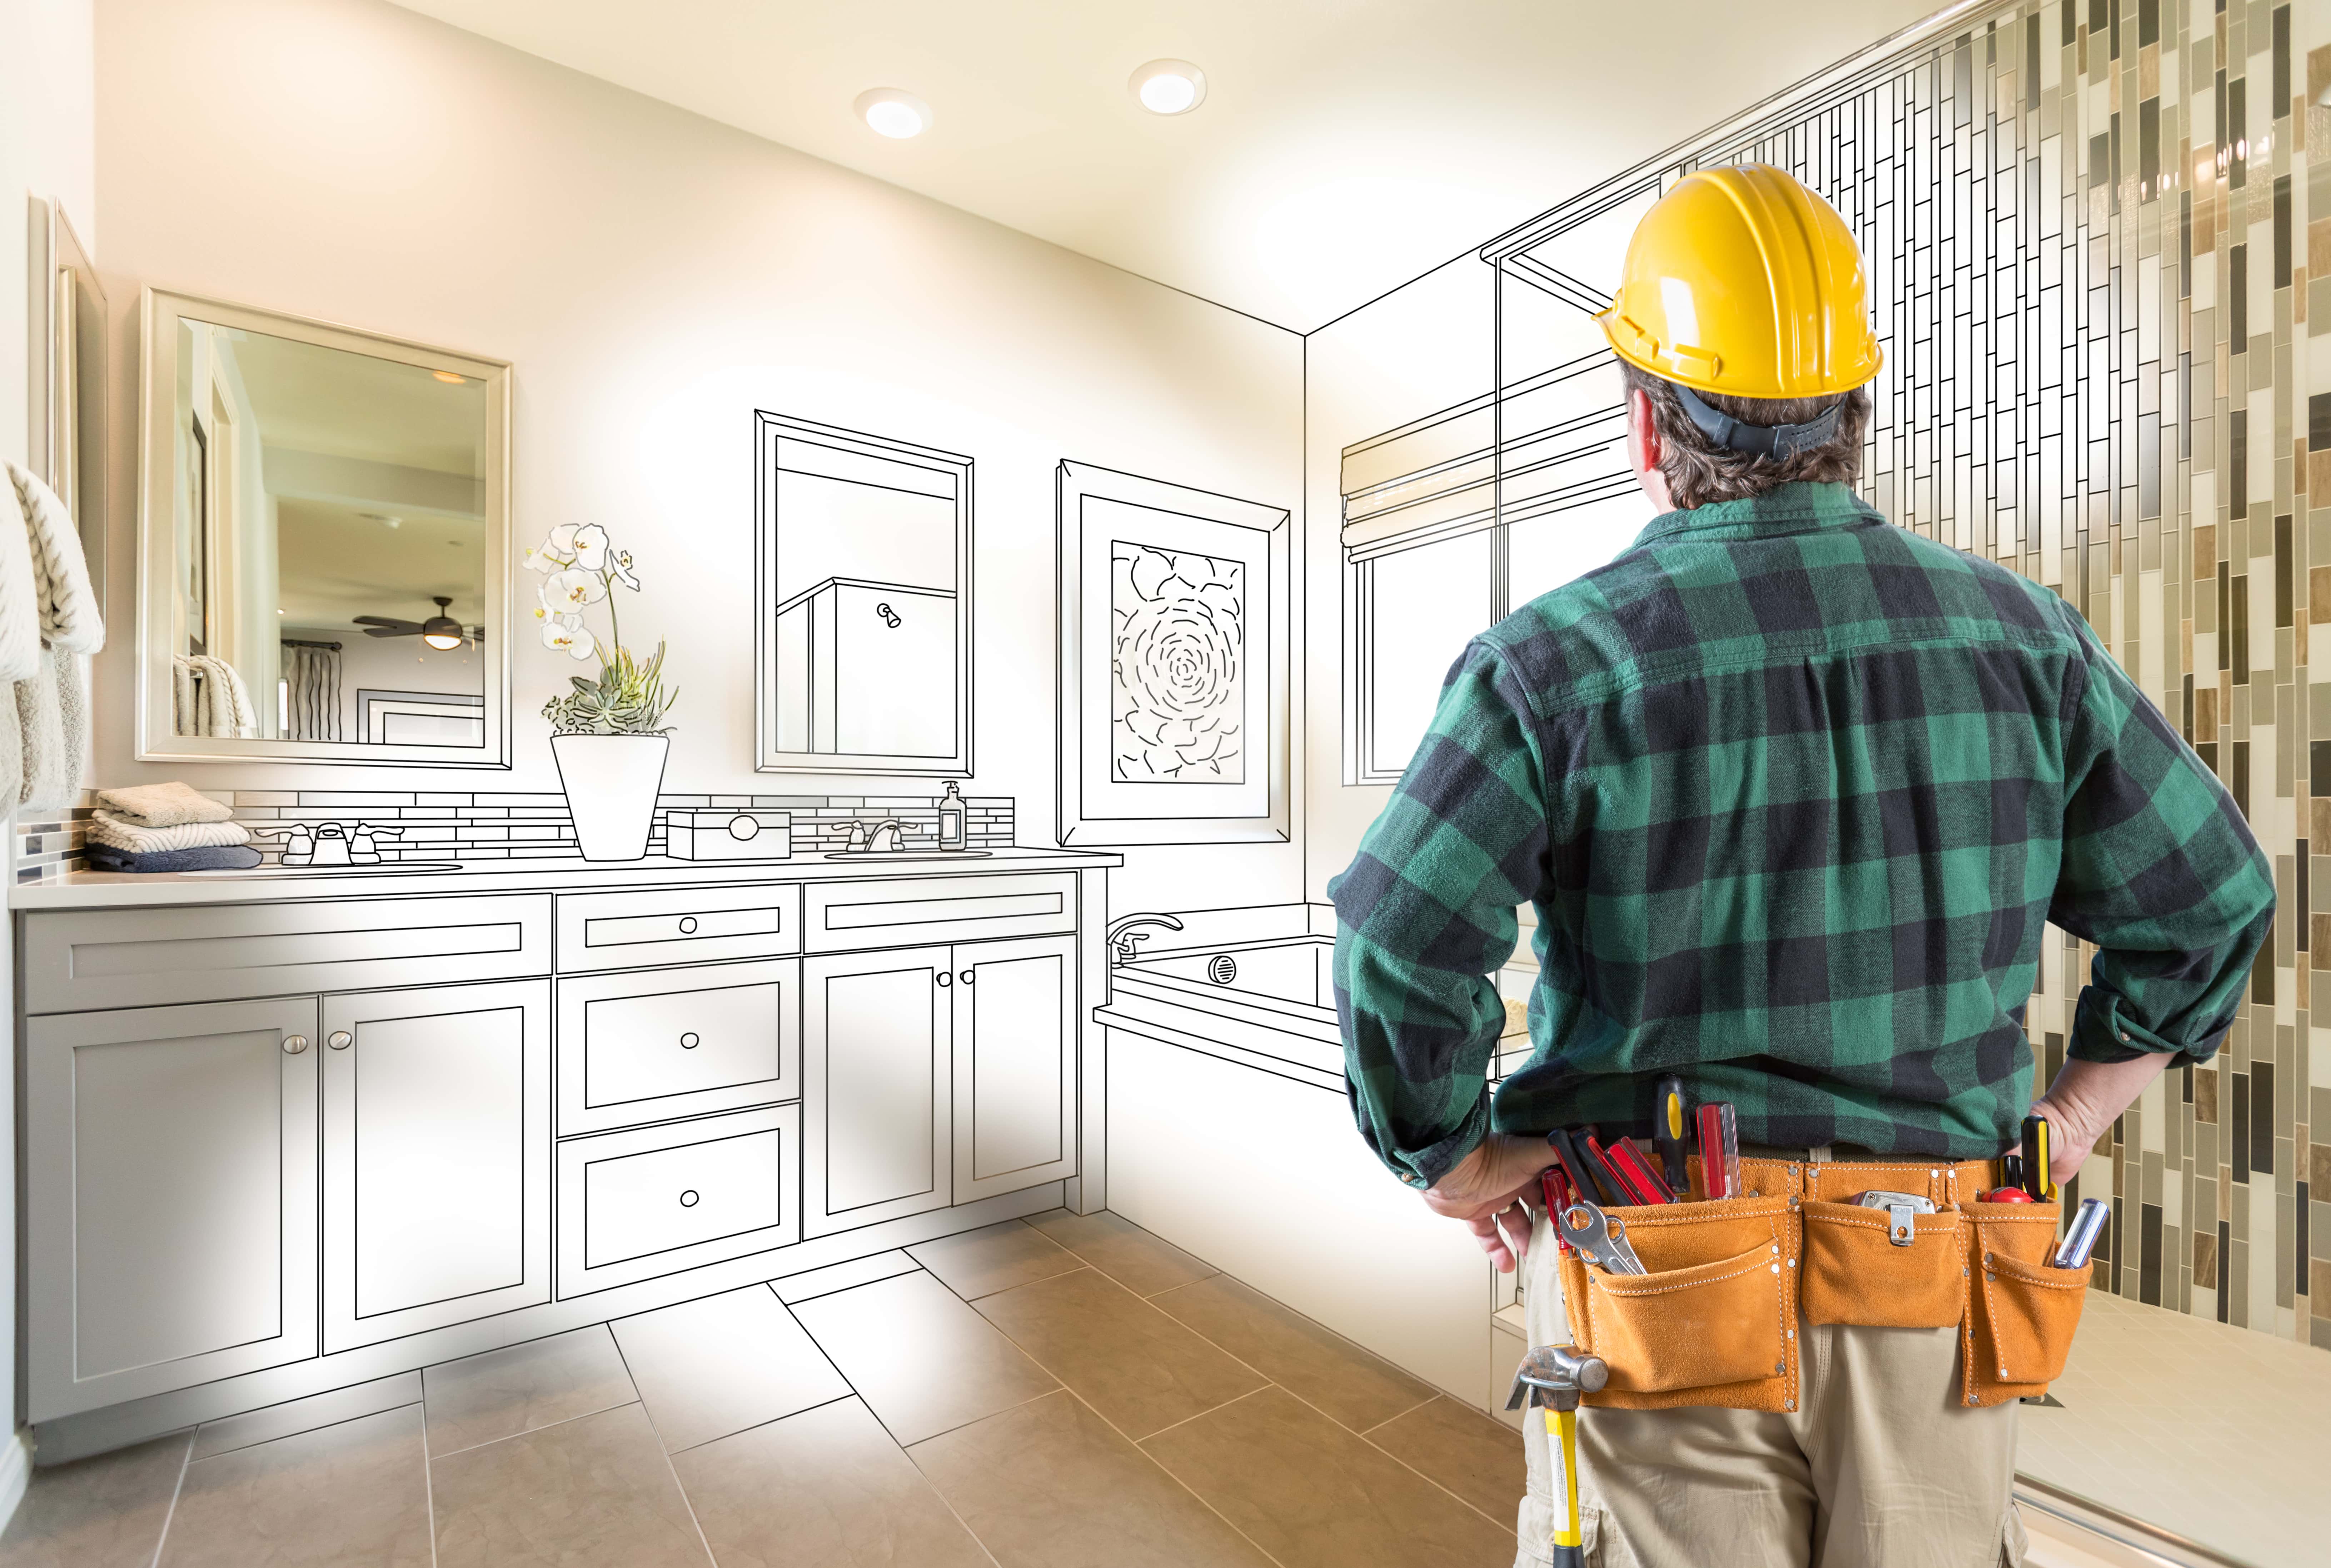 What Are My Legal Responsibilities As A General Contractor?